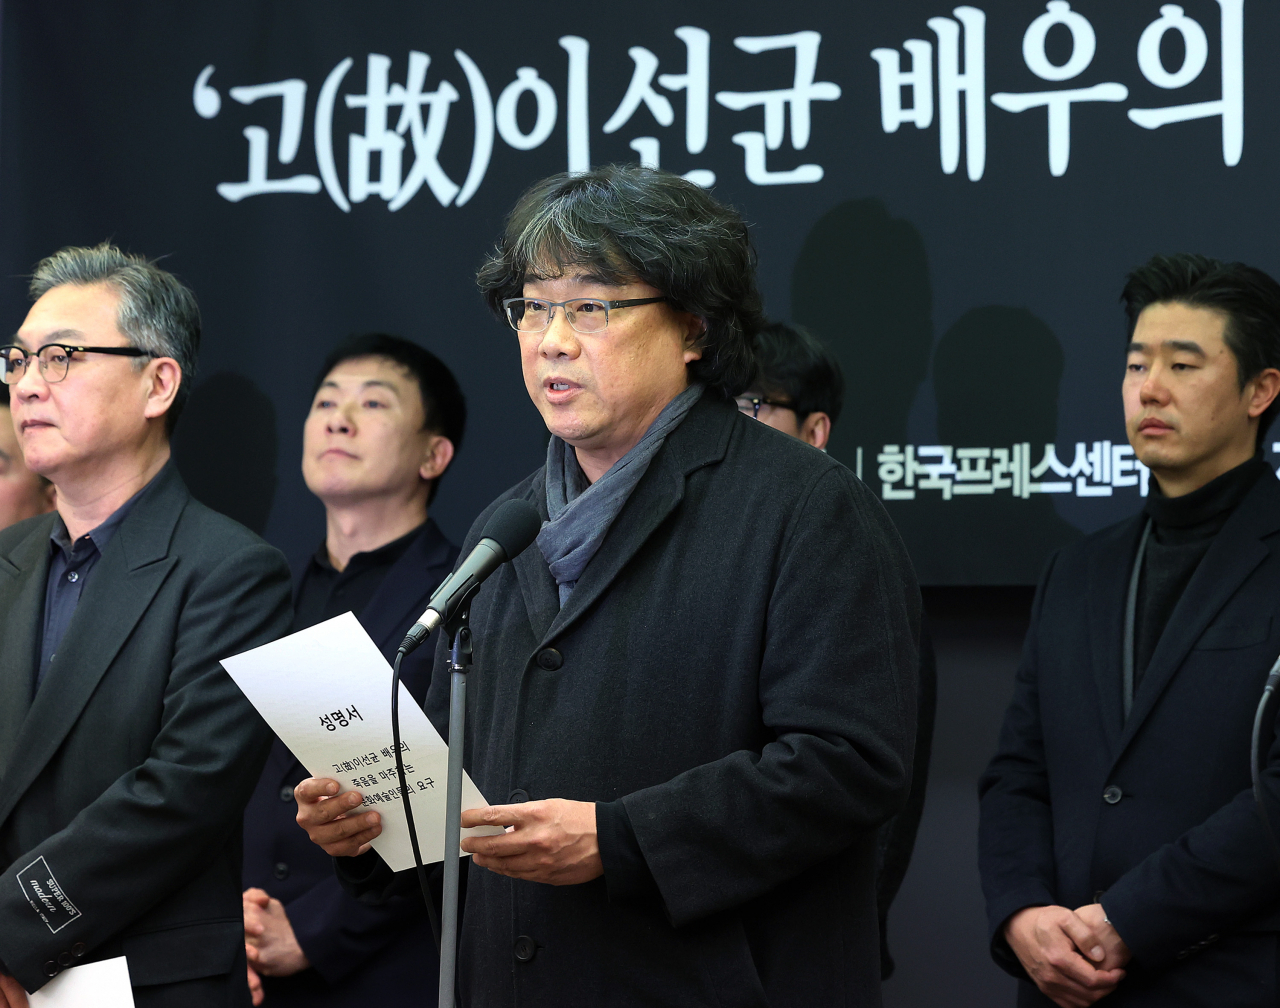 Director Bong Joon-ho reads a statement decrying the police investigation on Lee Sun-kyun, during a conference held at Korea Press Center on Jan.12. (Yonhap)